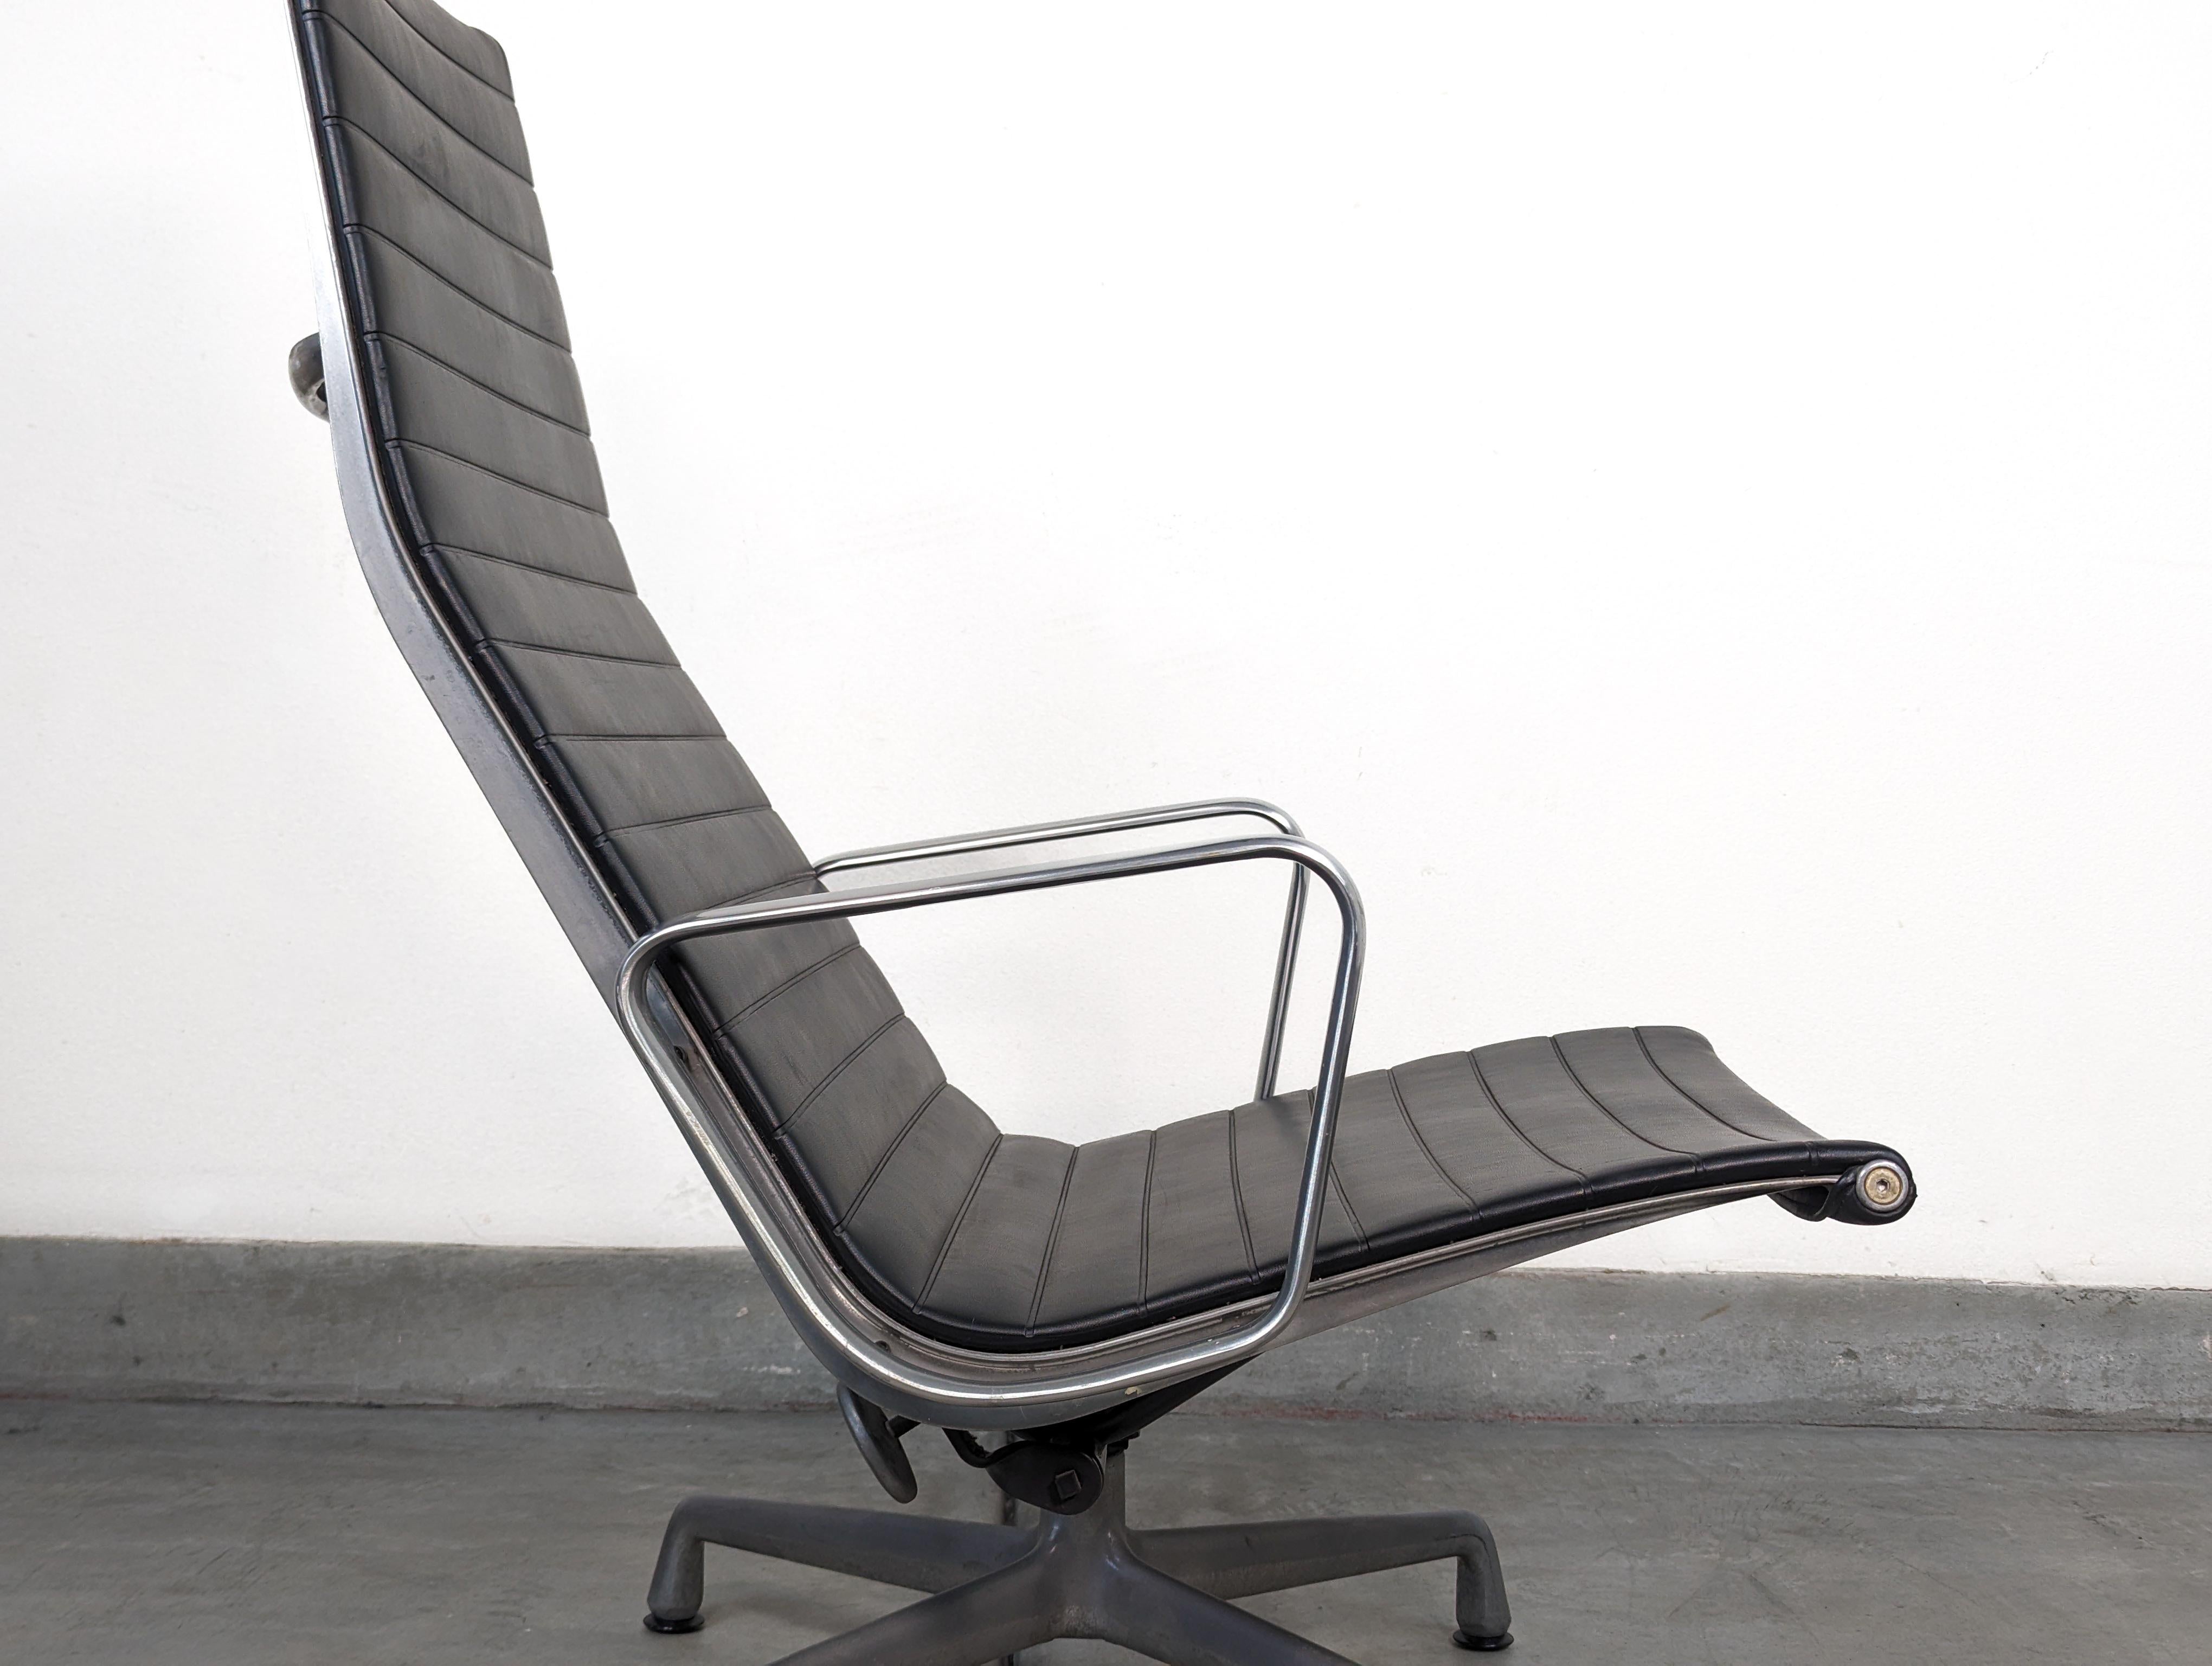 Eames Aluminum Group Lounge Office Chair by Herman Miller, c1990s For Sale 7